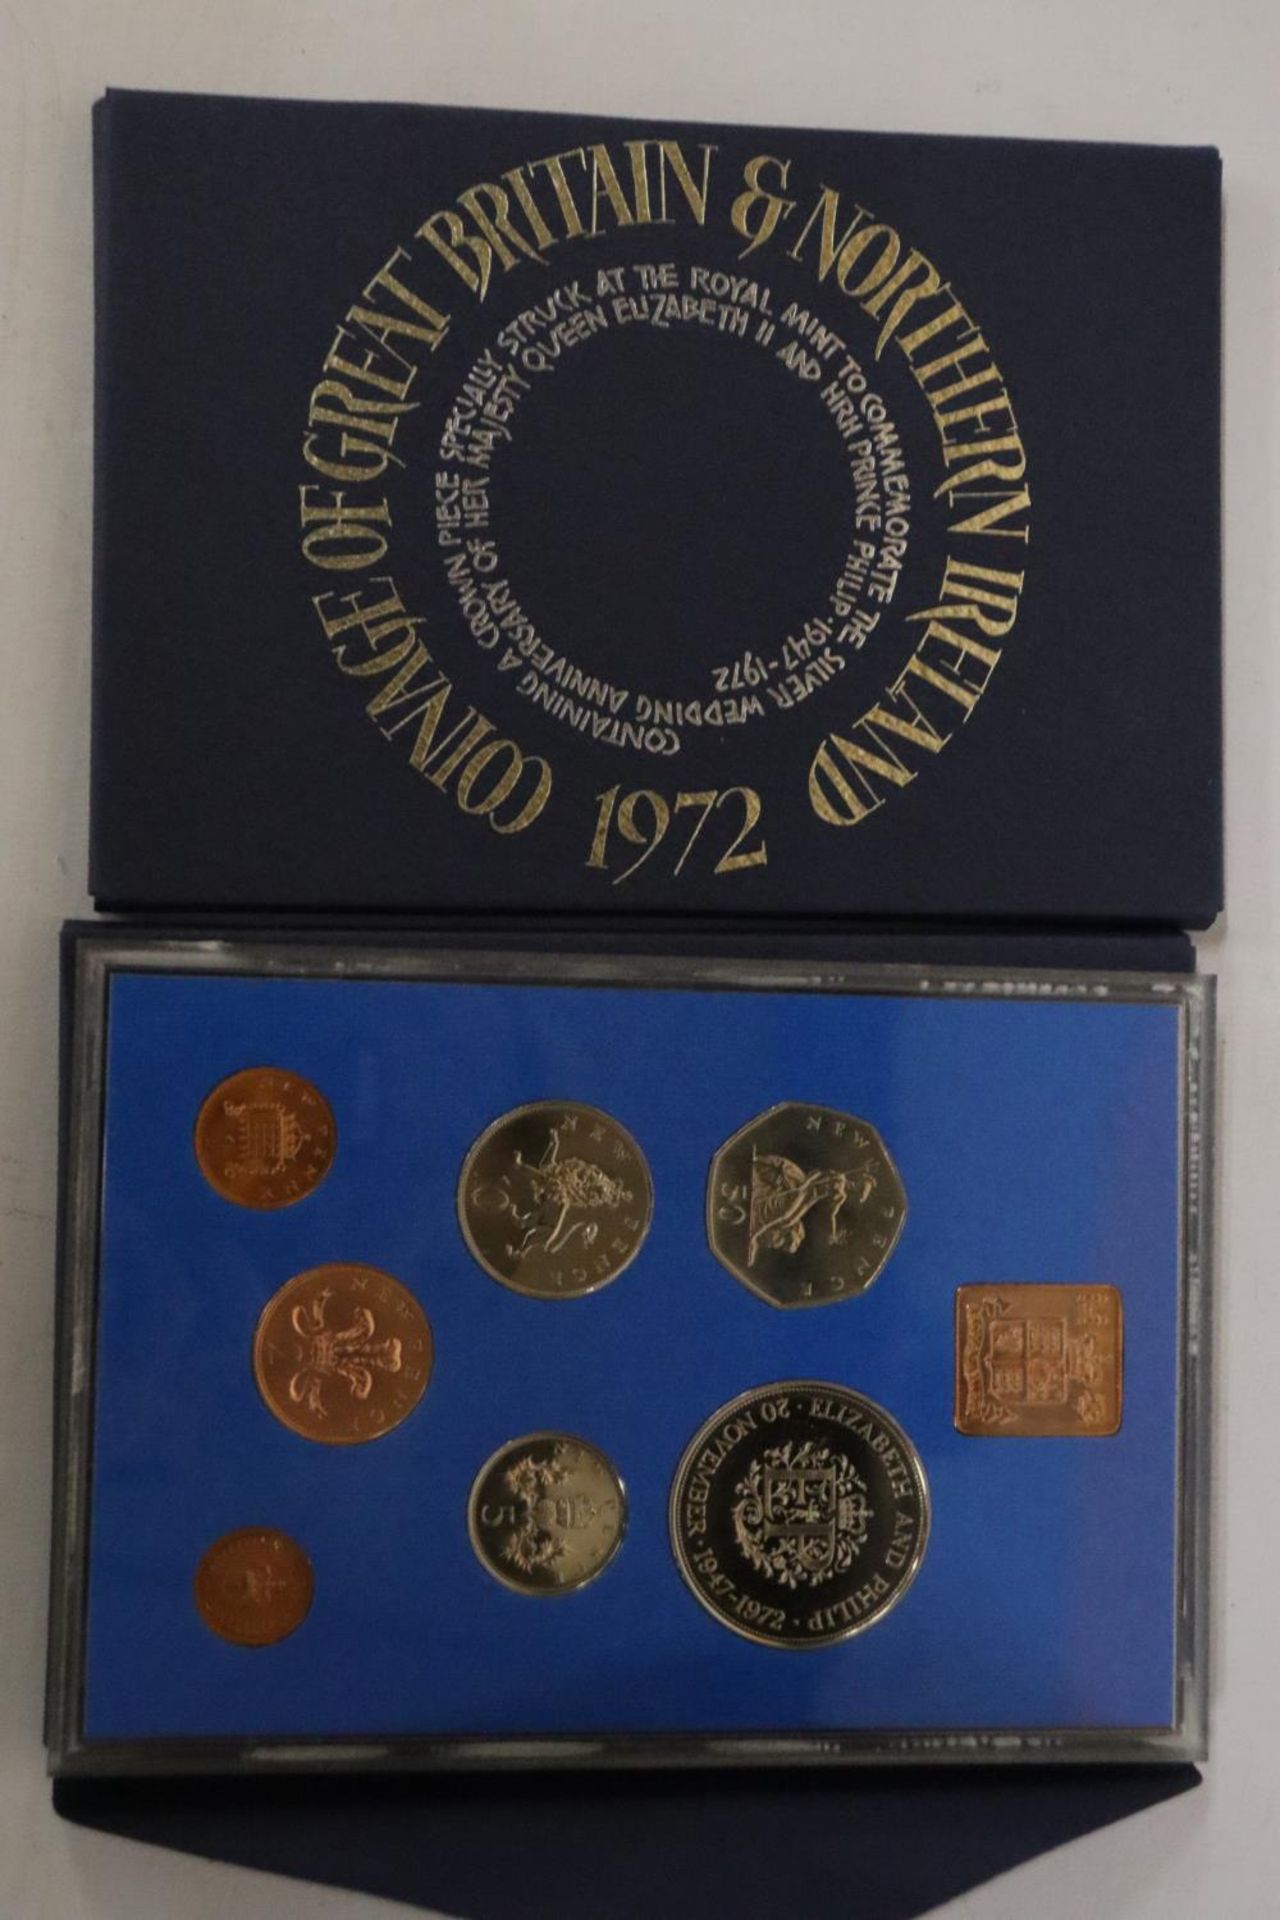 UK & NI , 2 X 1972, 2 X’73, 2 X ’74 AND 2 X ’75 YEAR PACKS OF COINS CONTAINED IN ENVELOPE - Image 5 of 5